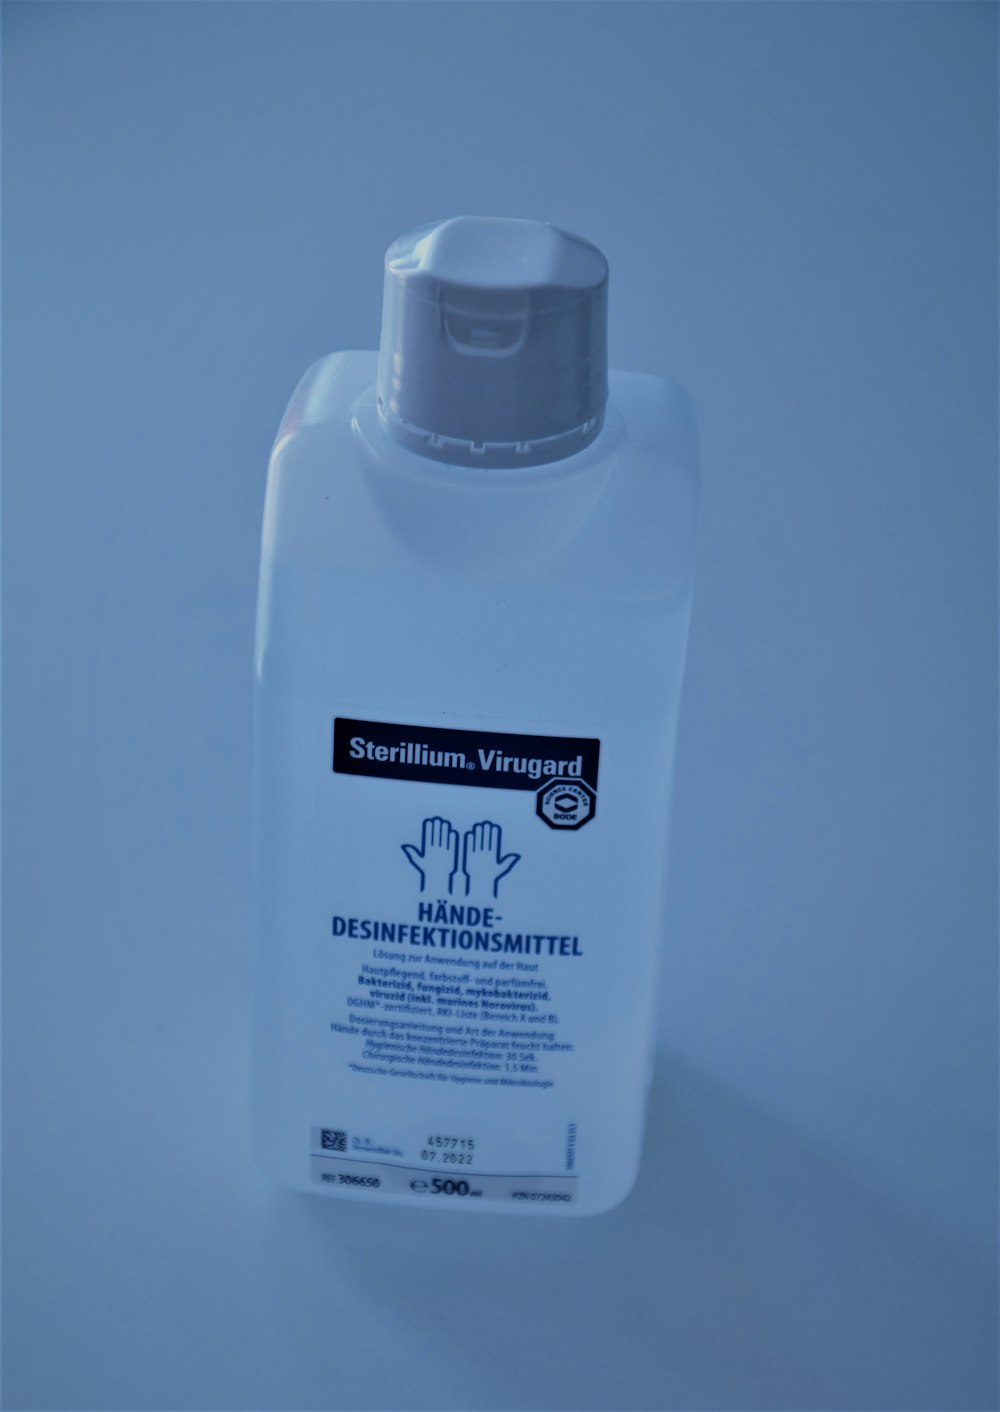 a bottle of deodorant on a white surface